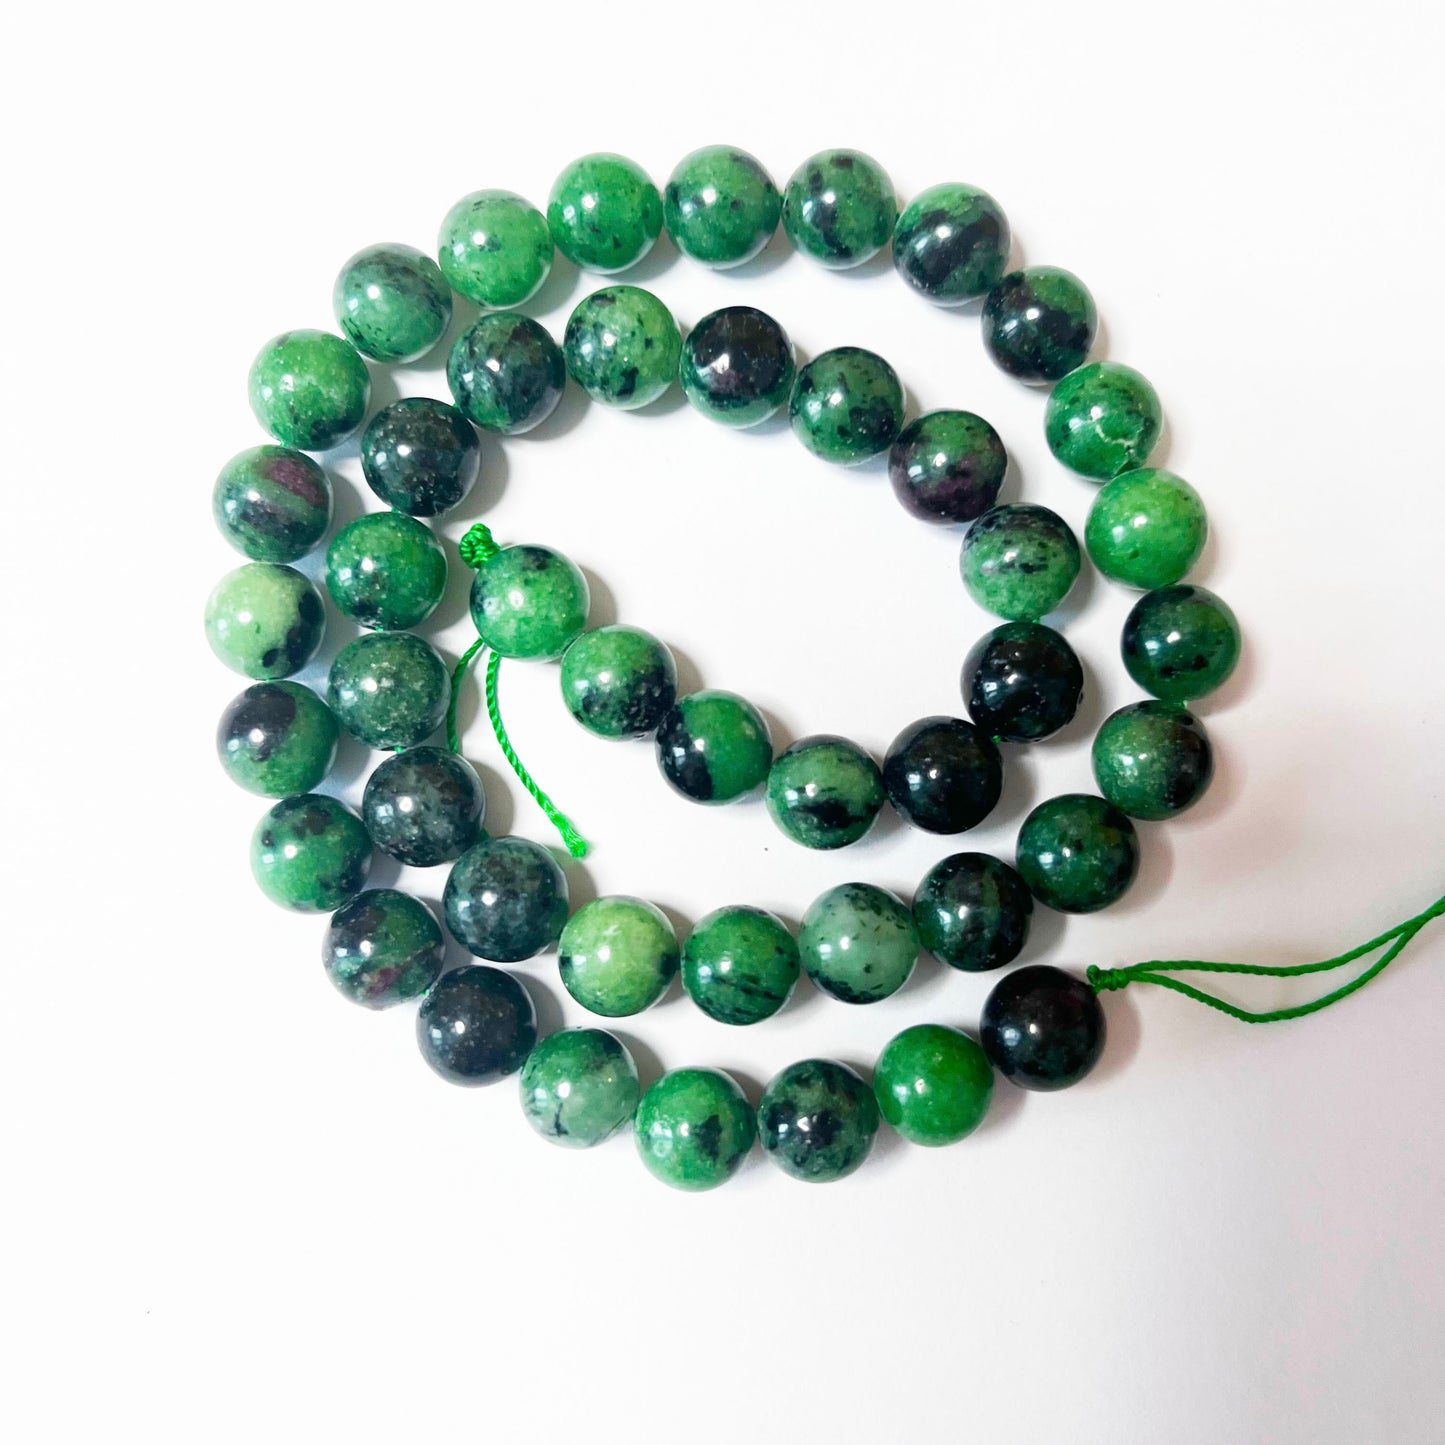 Ruby zoisite loose beads 6mm/8mm/10mm